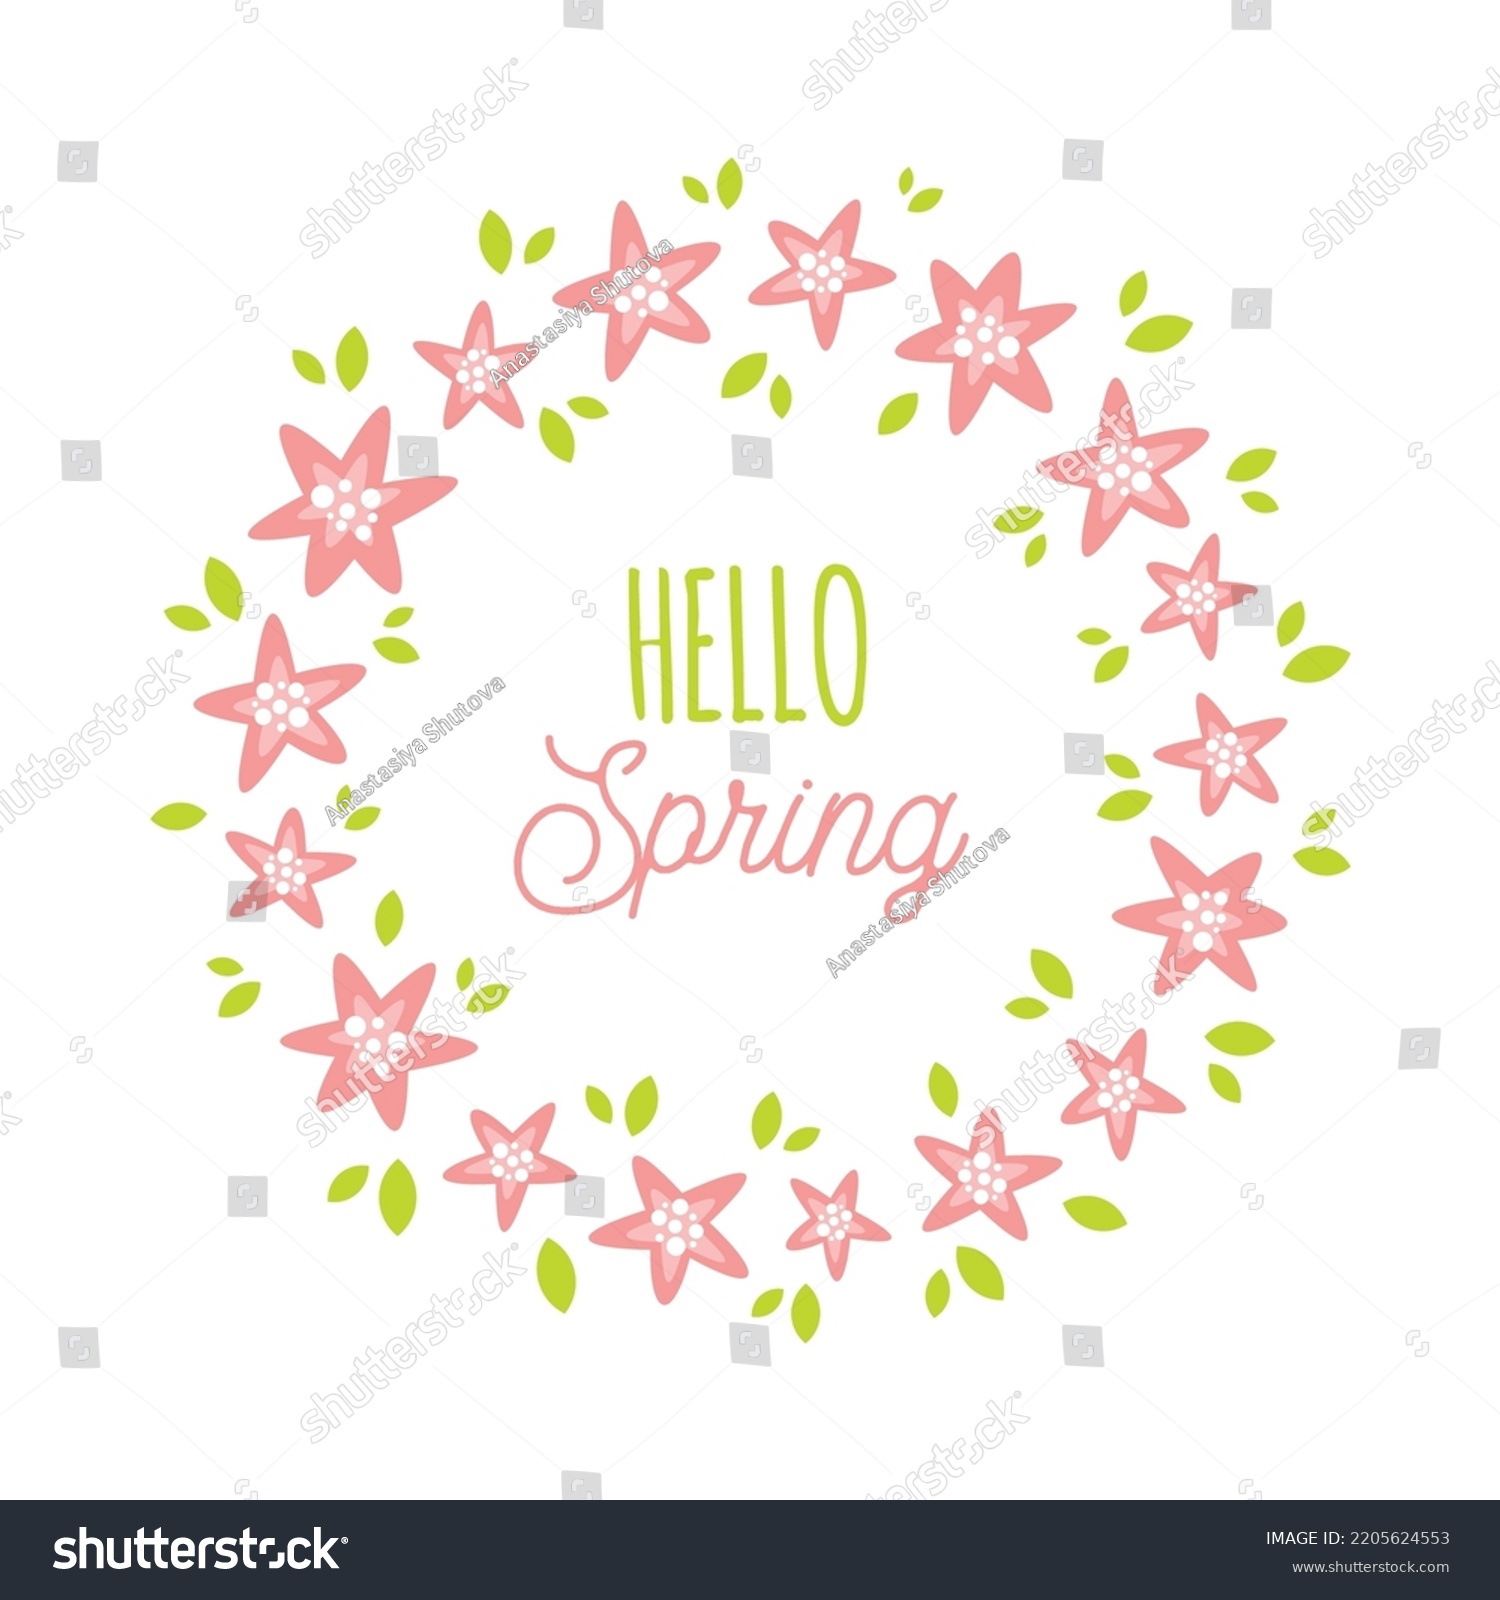 SVG of Hello Spring floral wreath Svg cut file. Vector illustration isolated on white background. Hello spring round sign or card. Cute hand drawn flowers and leaves svg